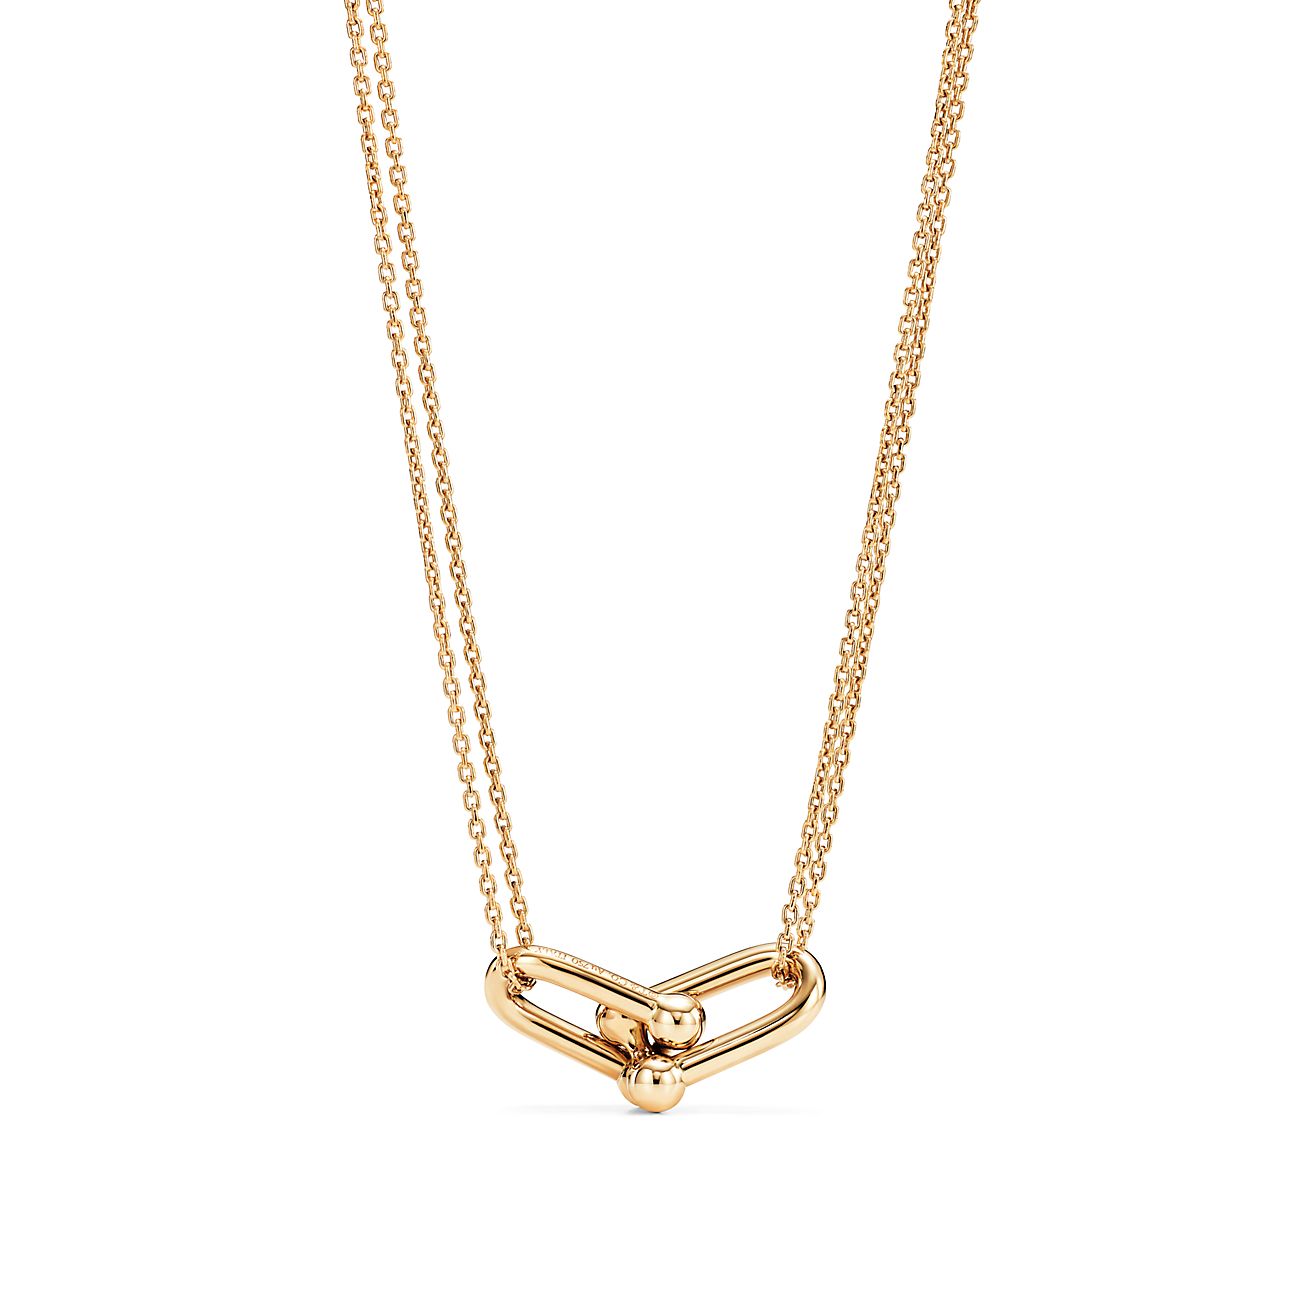 Please Return to Tiffany' Yellow Gold Necklace at Susannah Lovis Jewellers